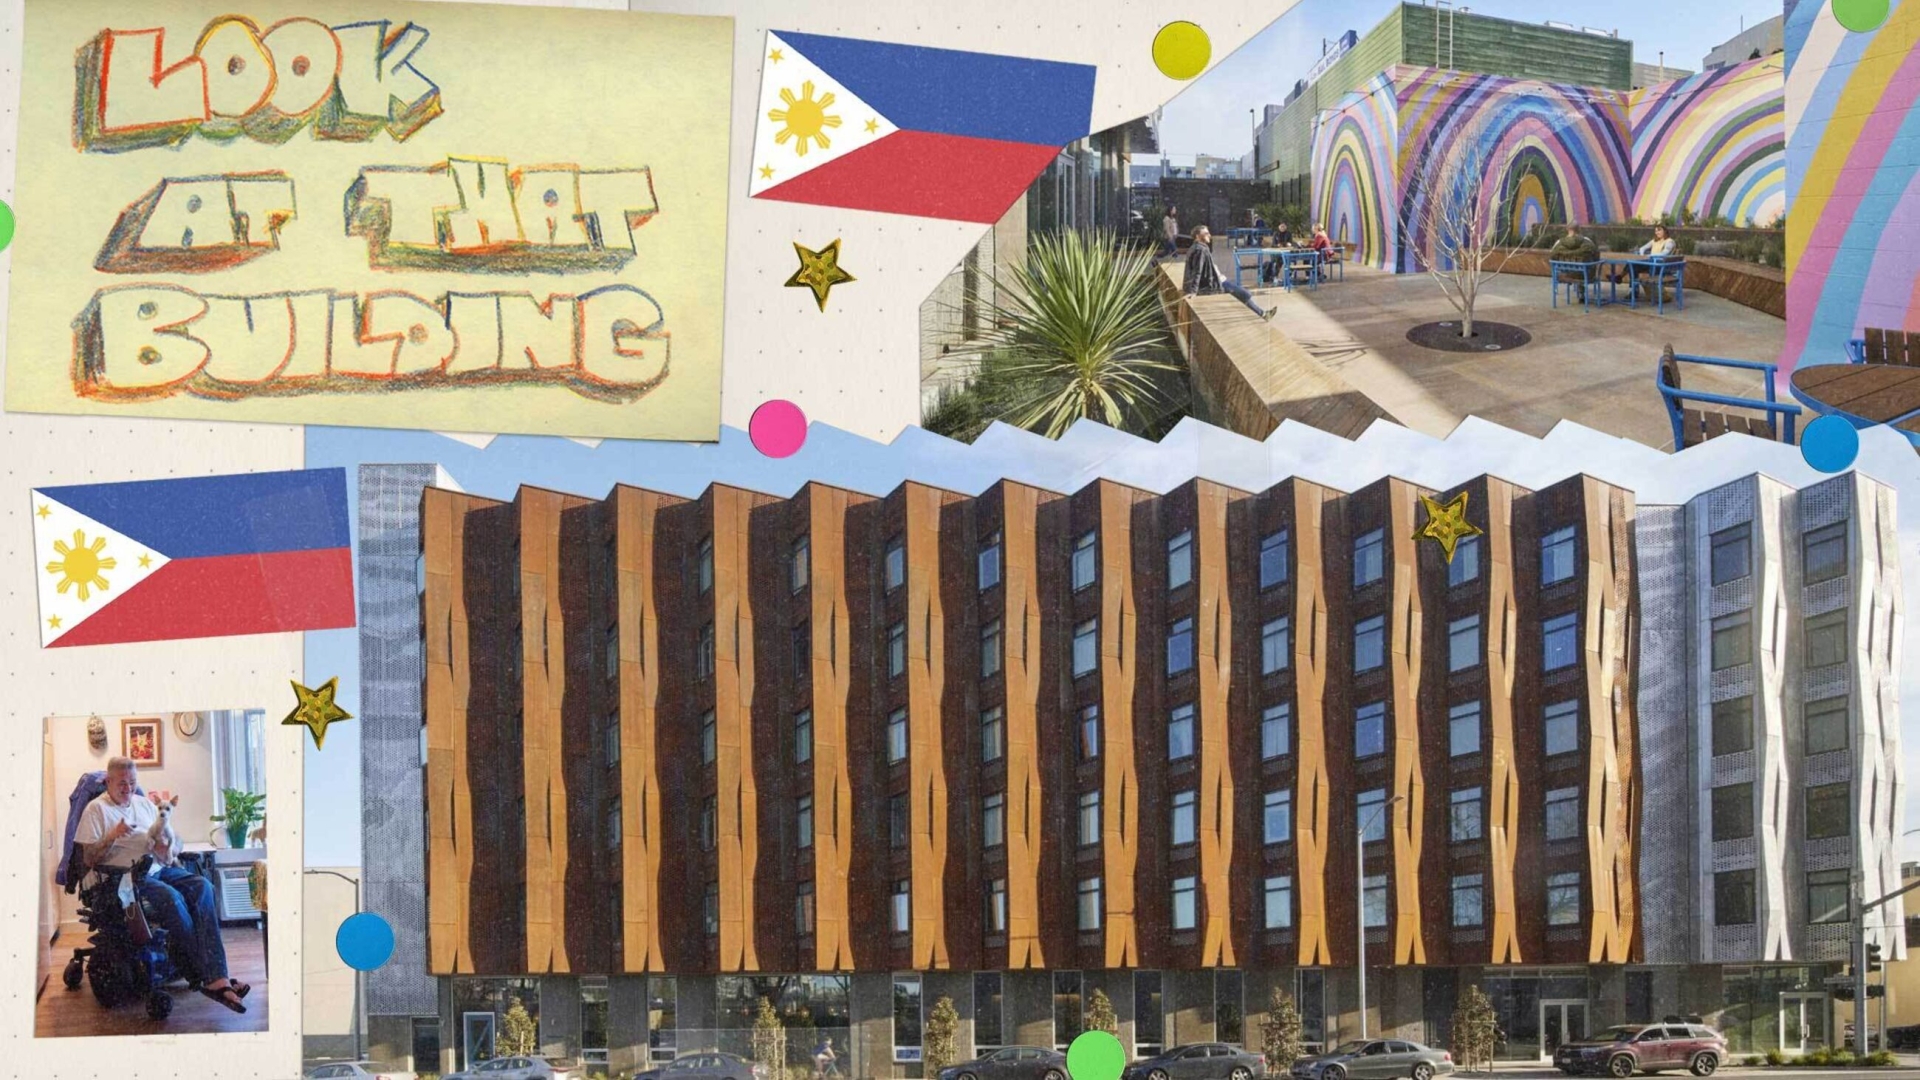 Collage of Tahanan Supportive Housing in San Francisco images, Filipino flags and text "Look at the building"